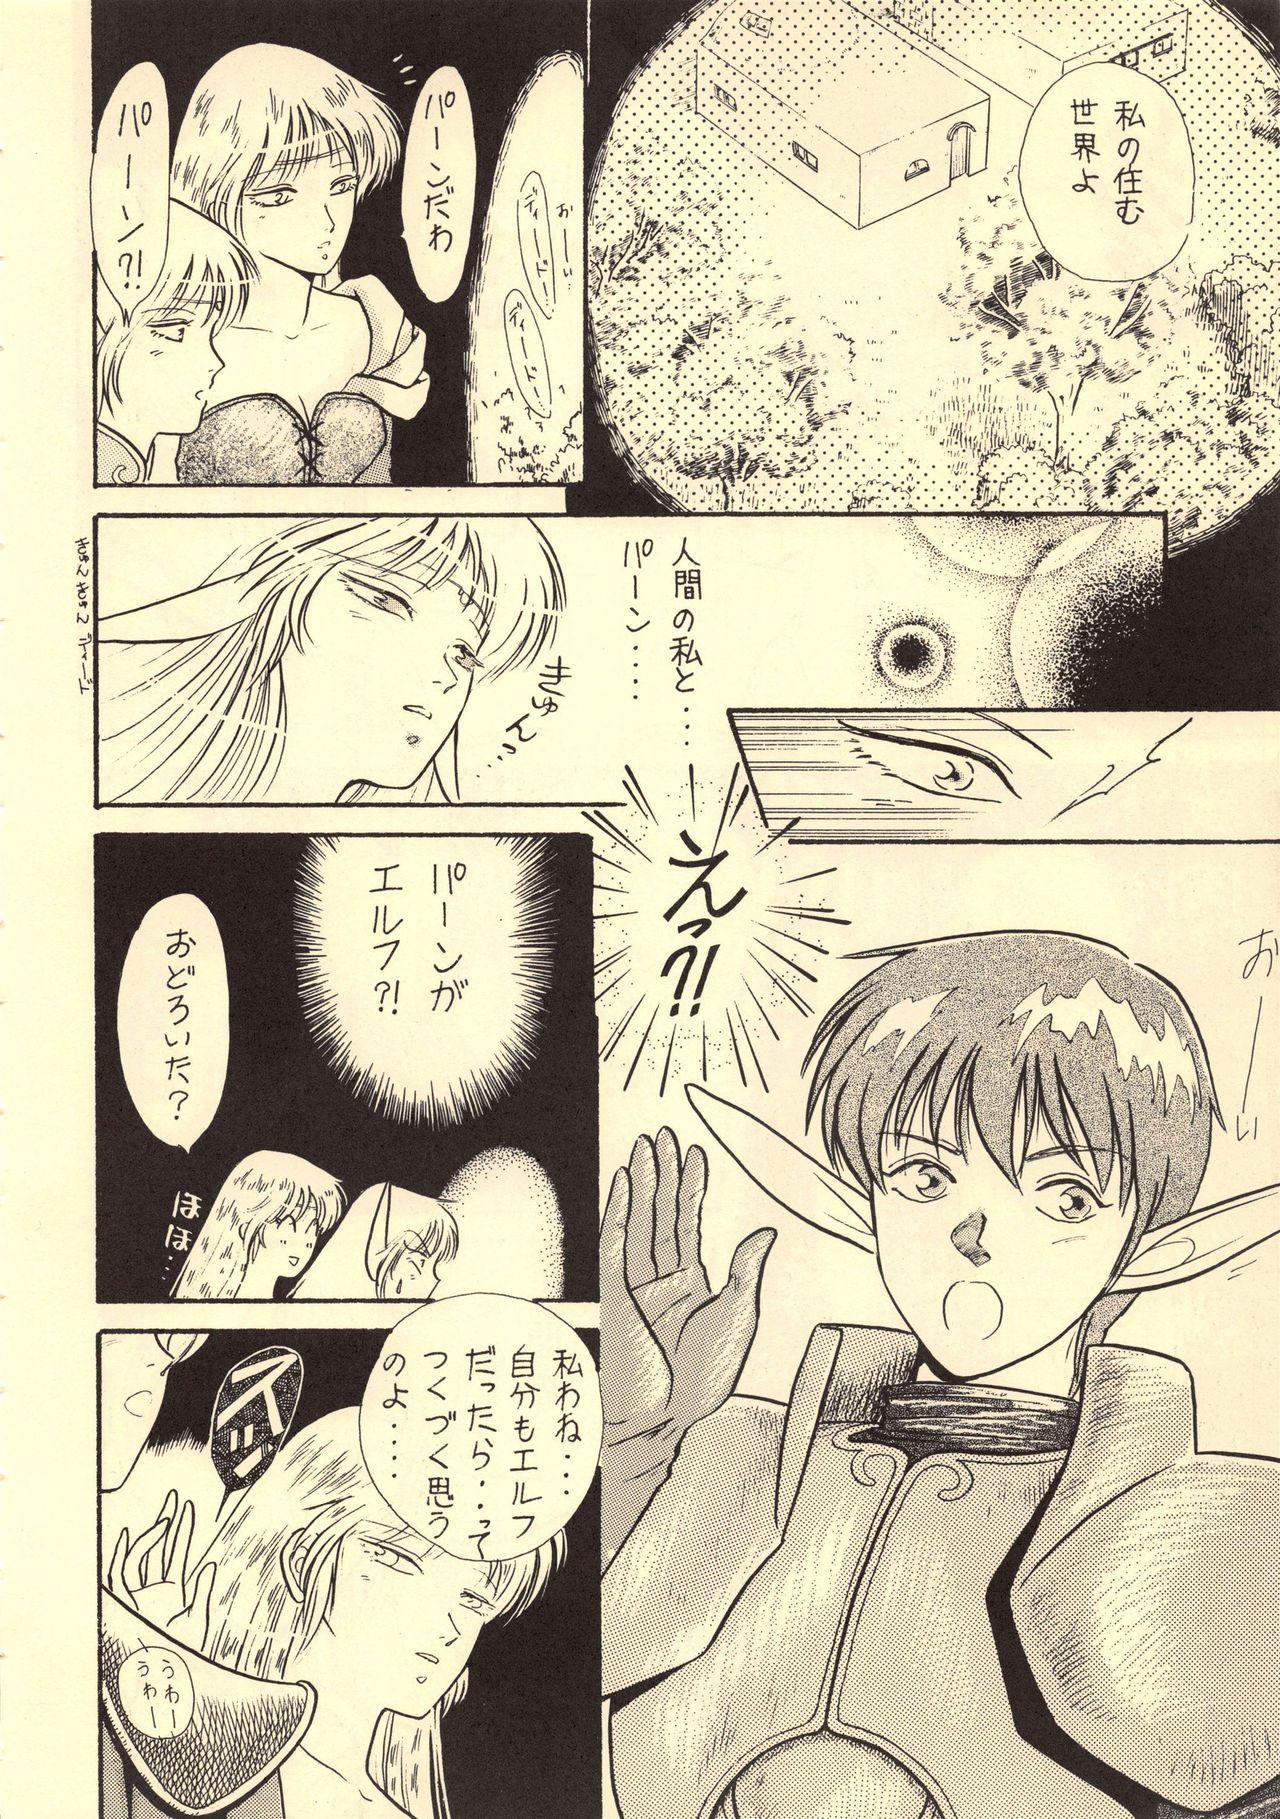 European Porn Elf no Musume Kaiteiban - Die Elfische Tochter revised edition - Record of lodoss war Pegging - Page 10